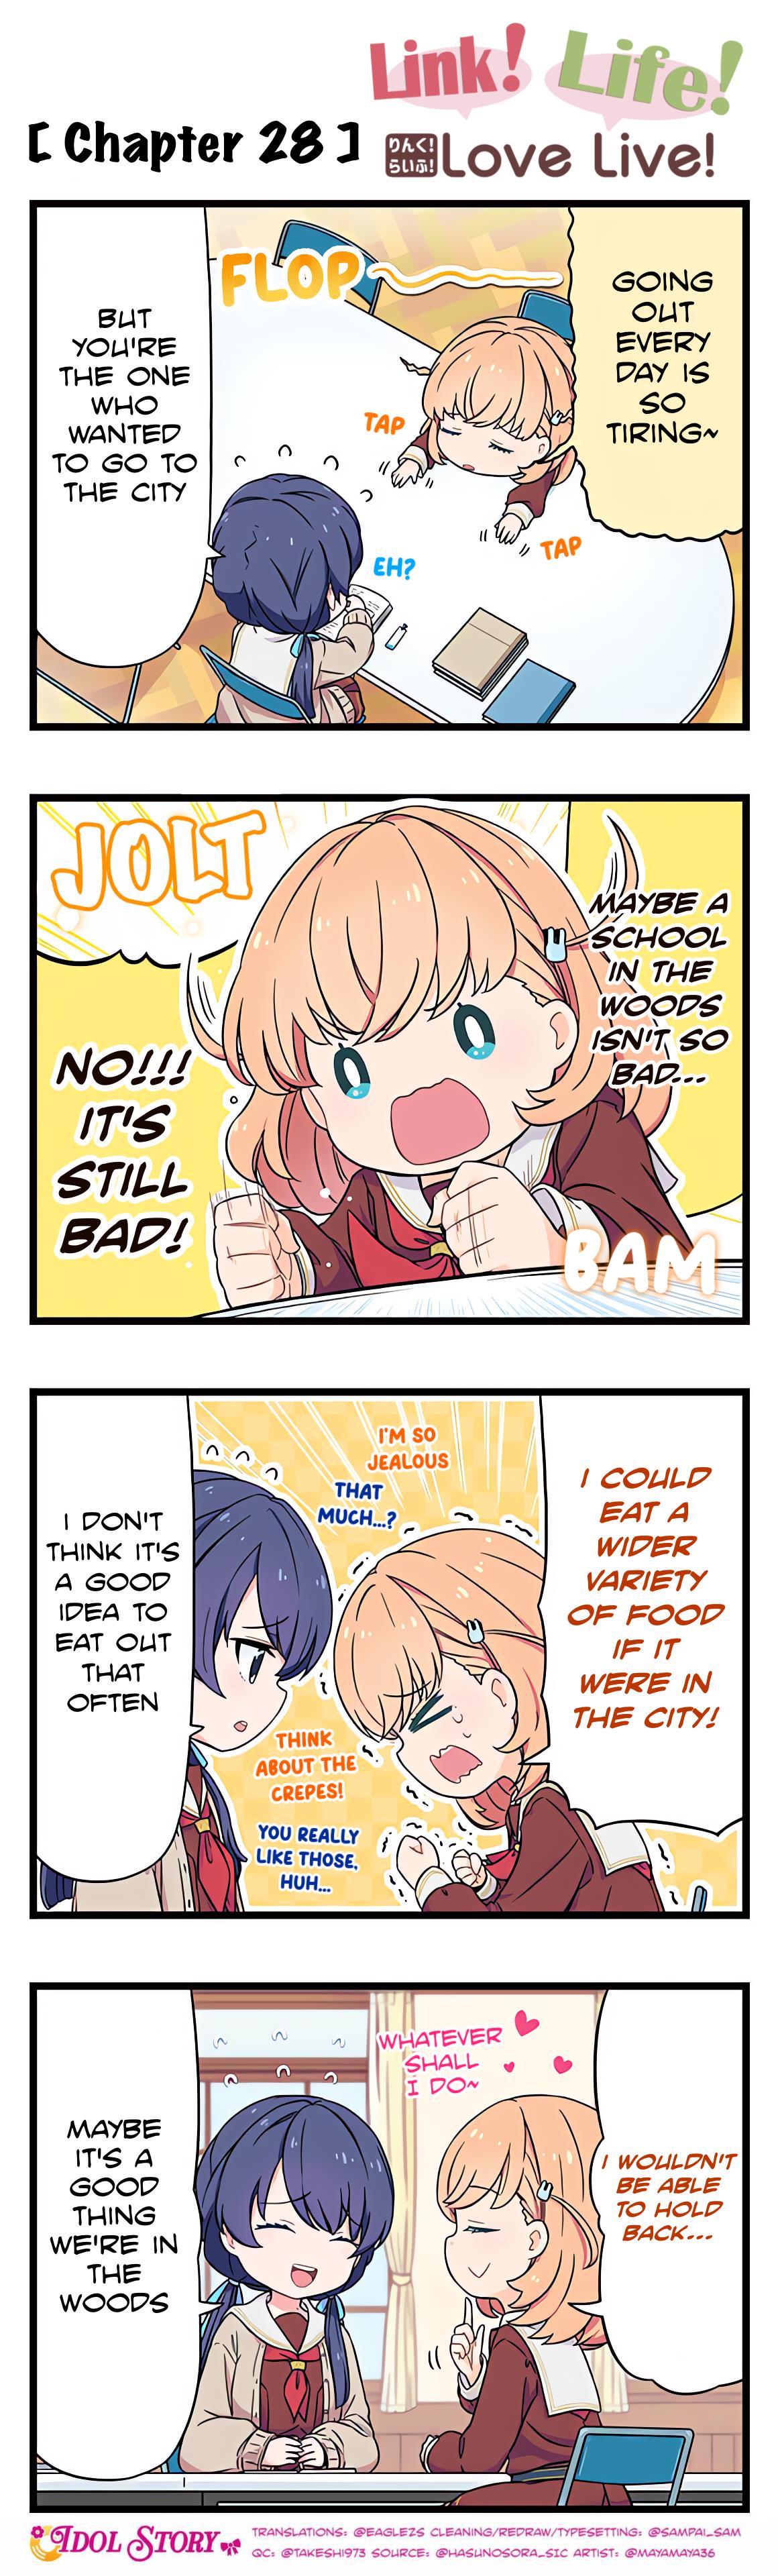 Link! Life! Love Live! Chapter 28 #1